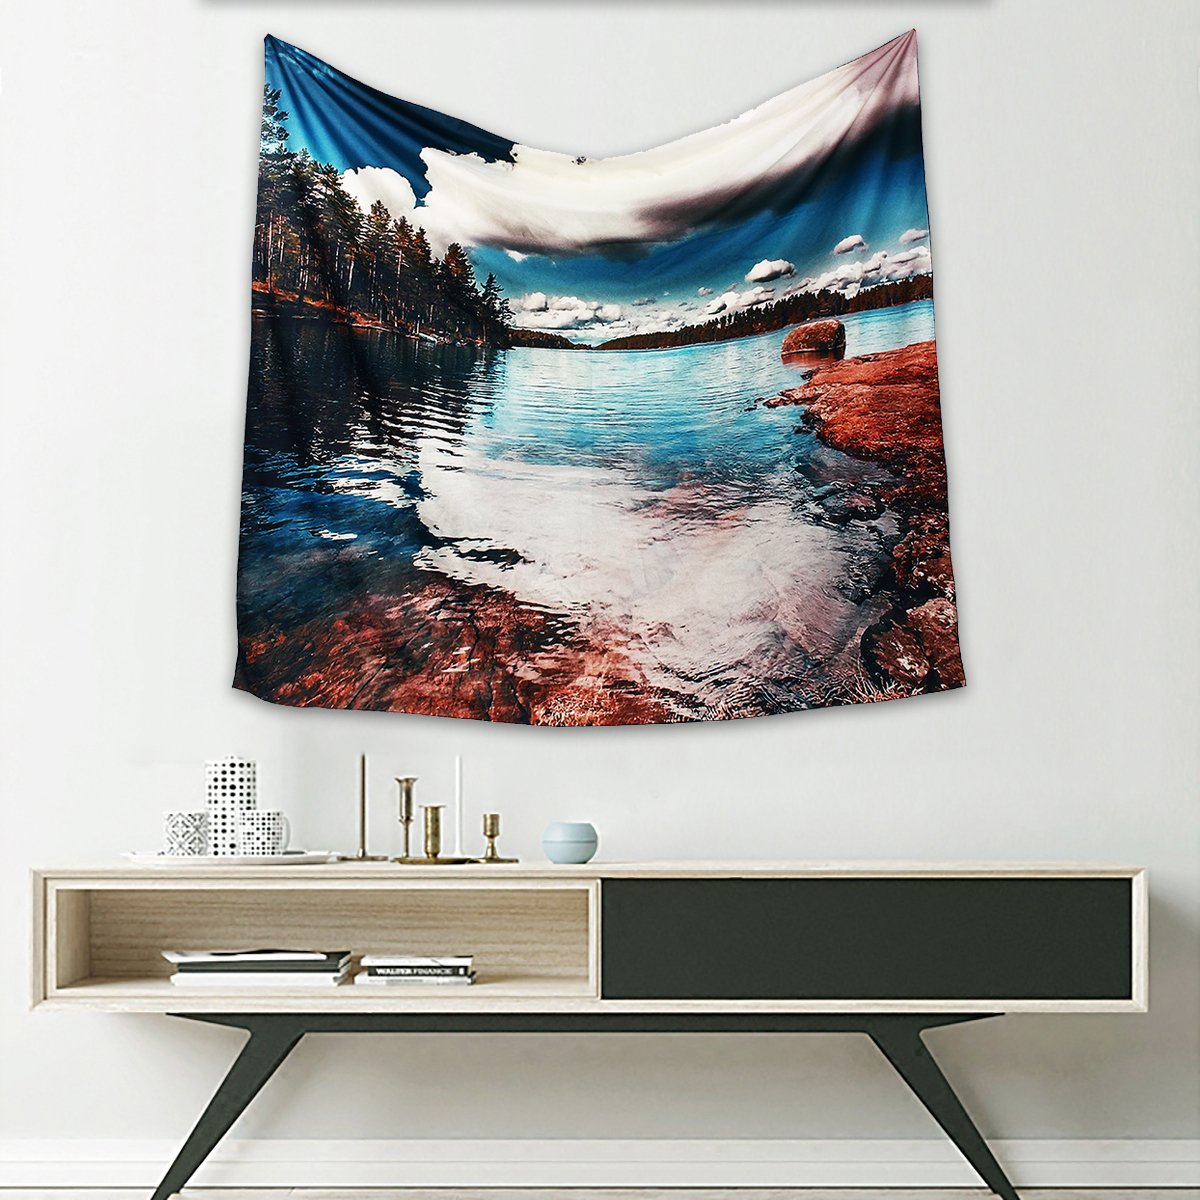 Forest-World-Map-Tapestries-Wall-Hanging-Paper-Tapestry-Bedspread-Dorm-Decor-1436138-9